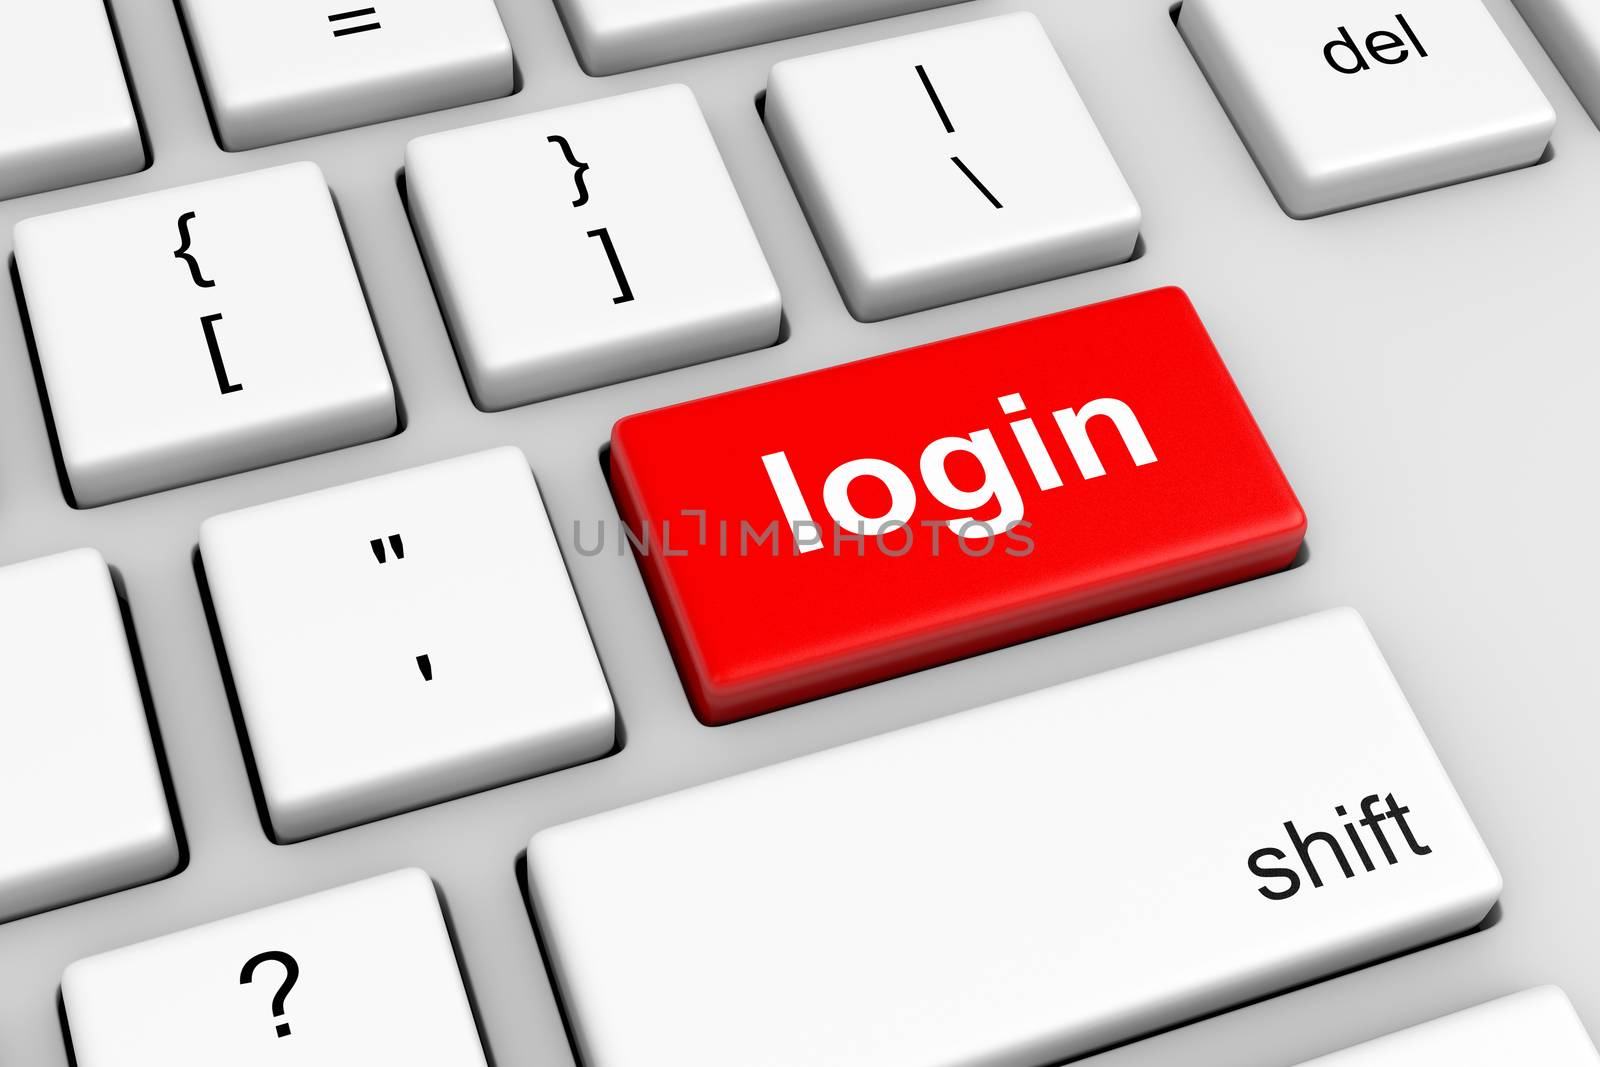 Computer Keyboard with Red Login Button Illustration